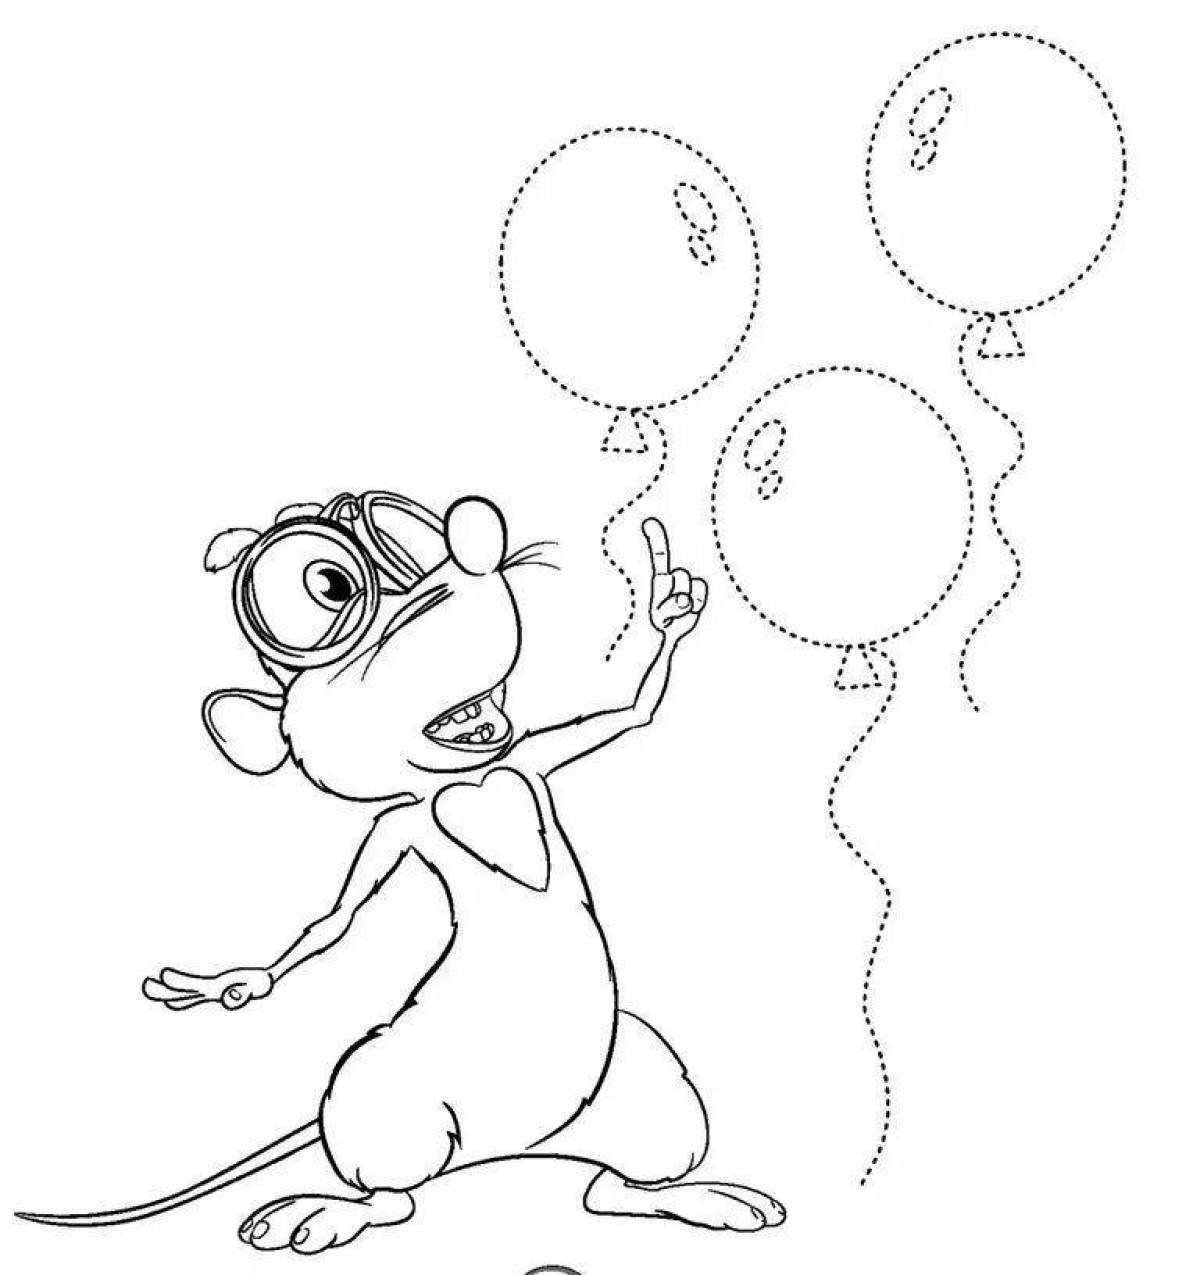 Color-frenzy buba and mouse coloring page